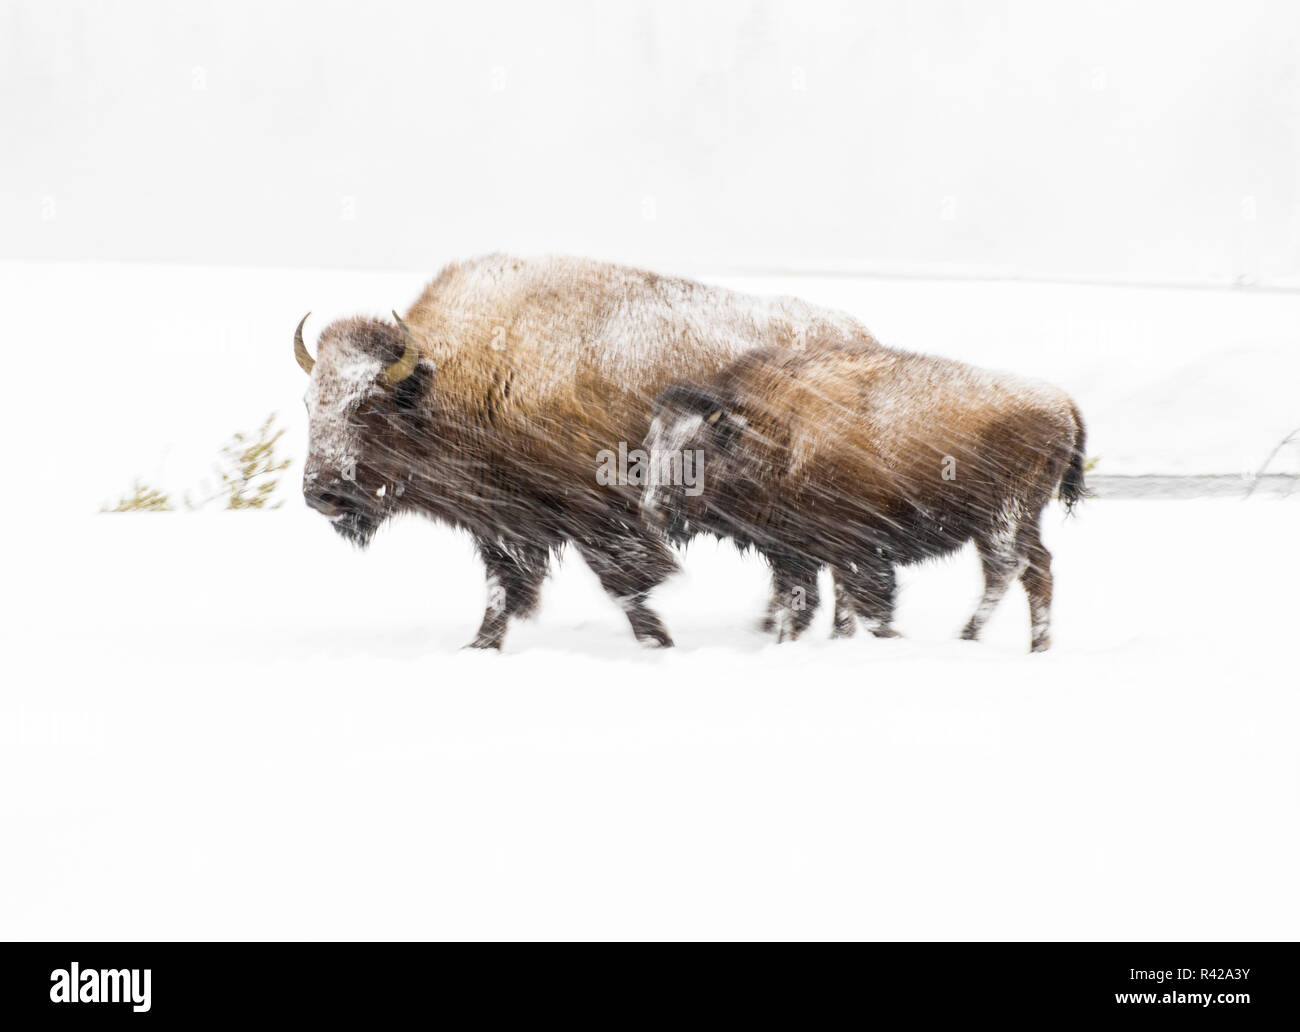 USA, Wyoming, Yellowstone National Park. Bison in winter. Stock Photo